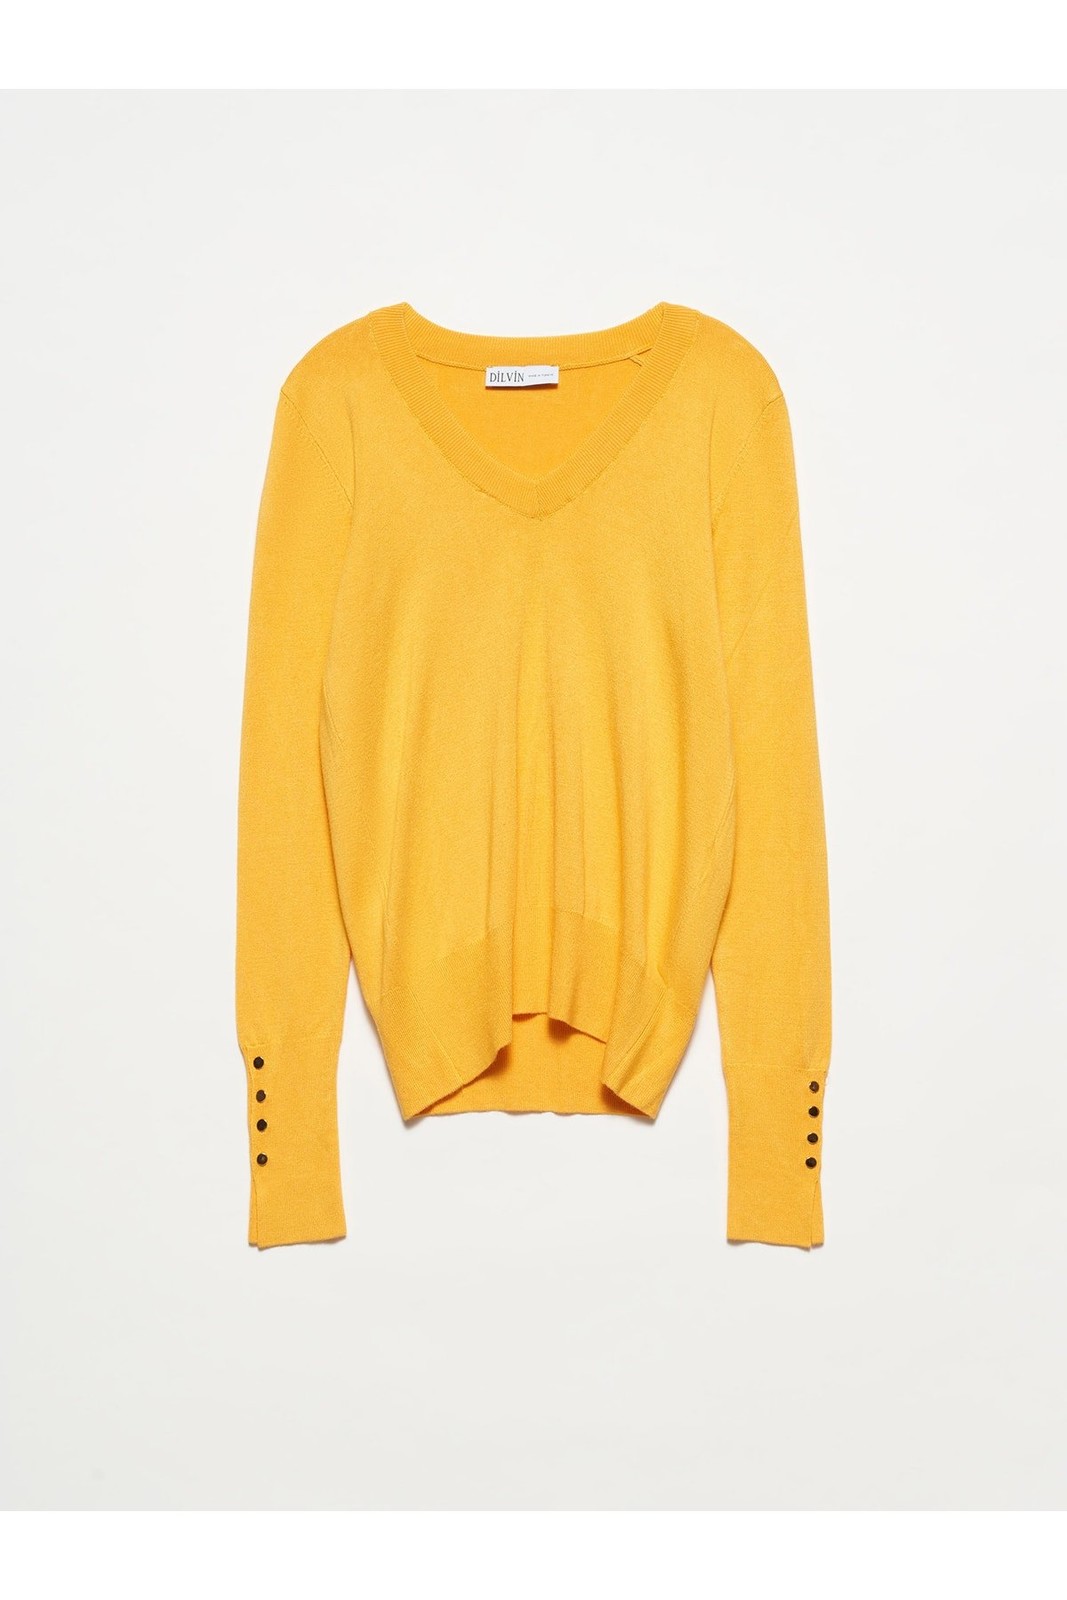 Dilvin 2443 V-Neck Sweater-mustard with Drop Dropped Arm Cuffs